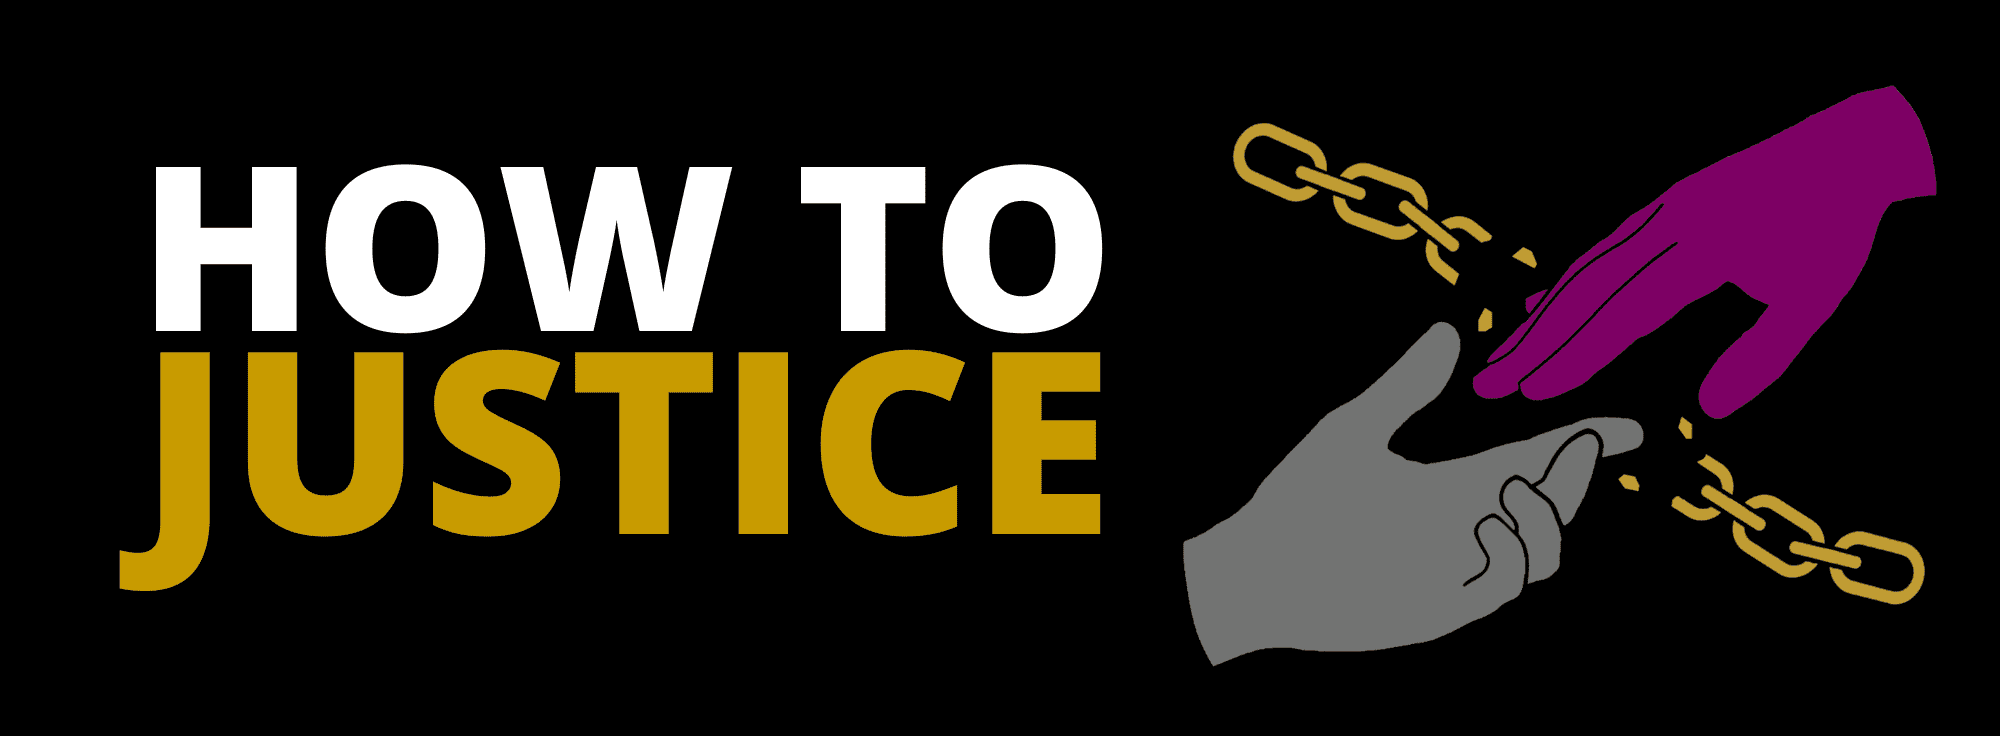 How to Justice